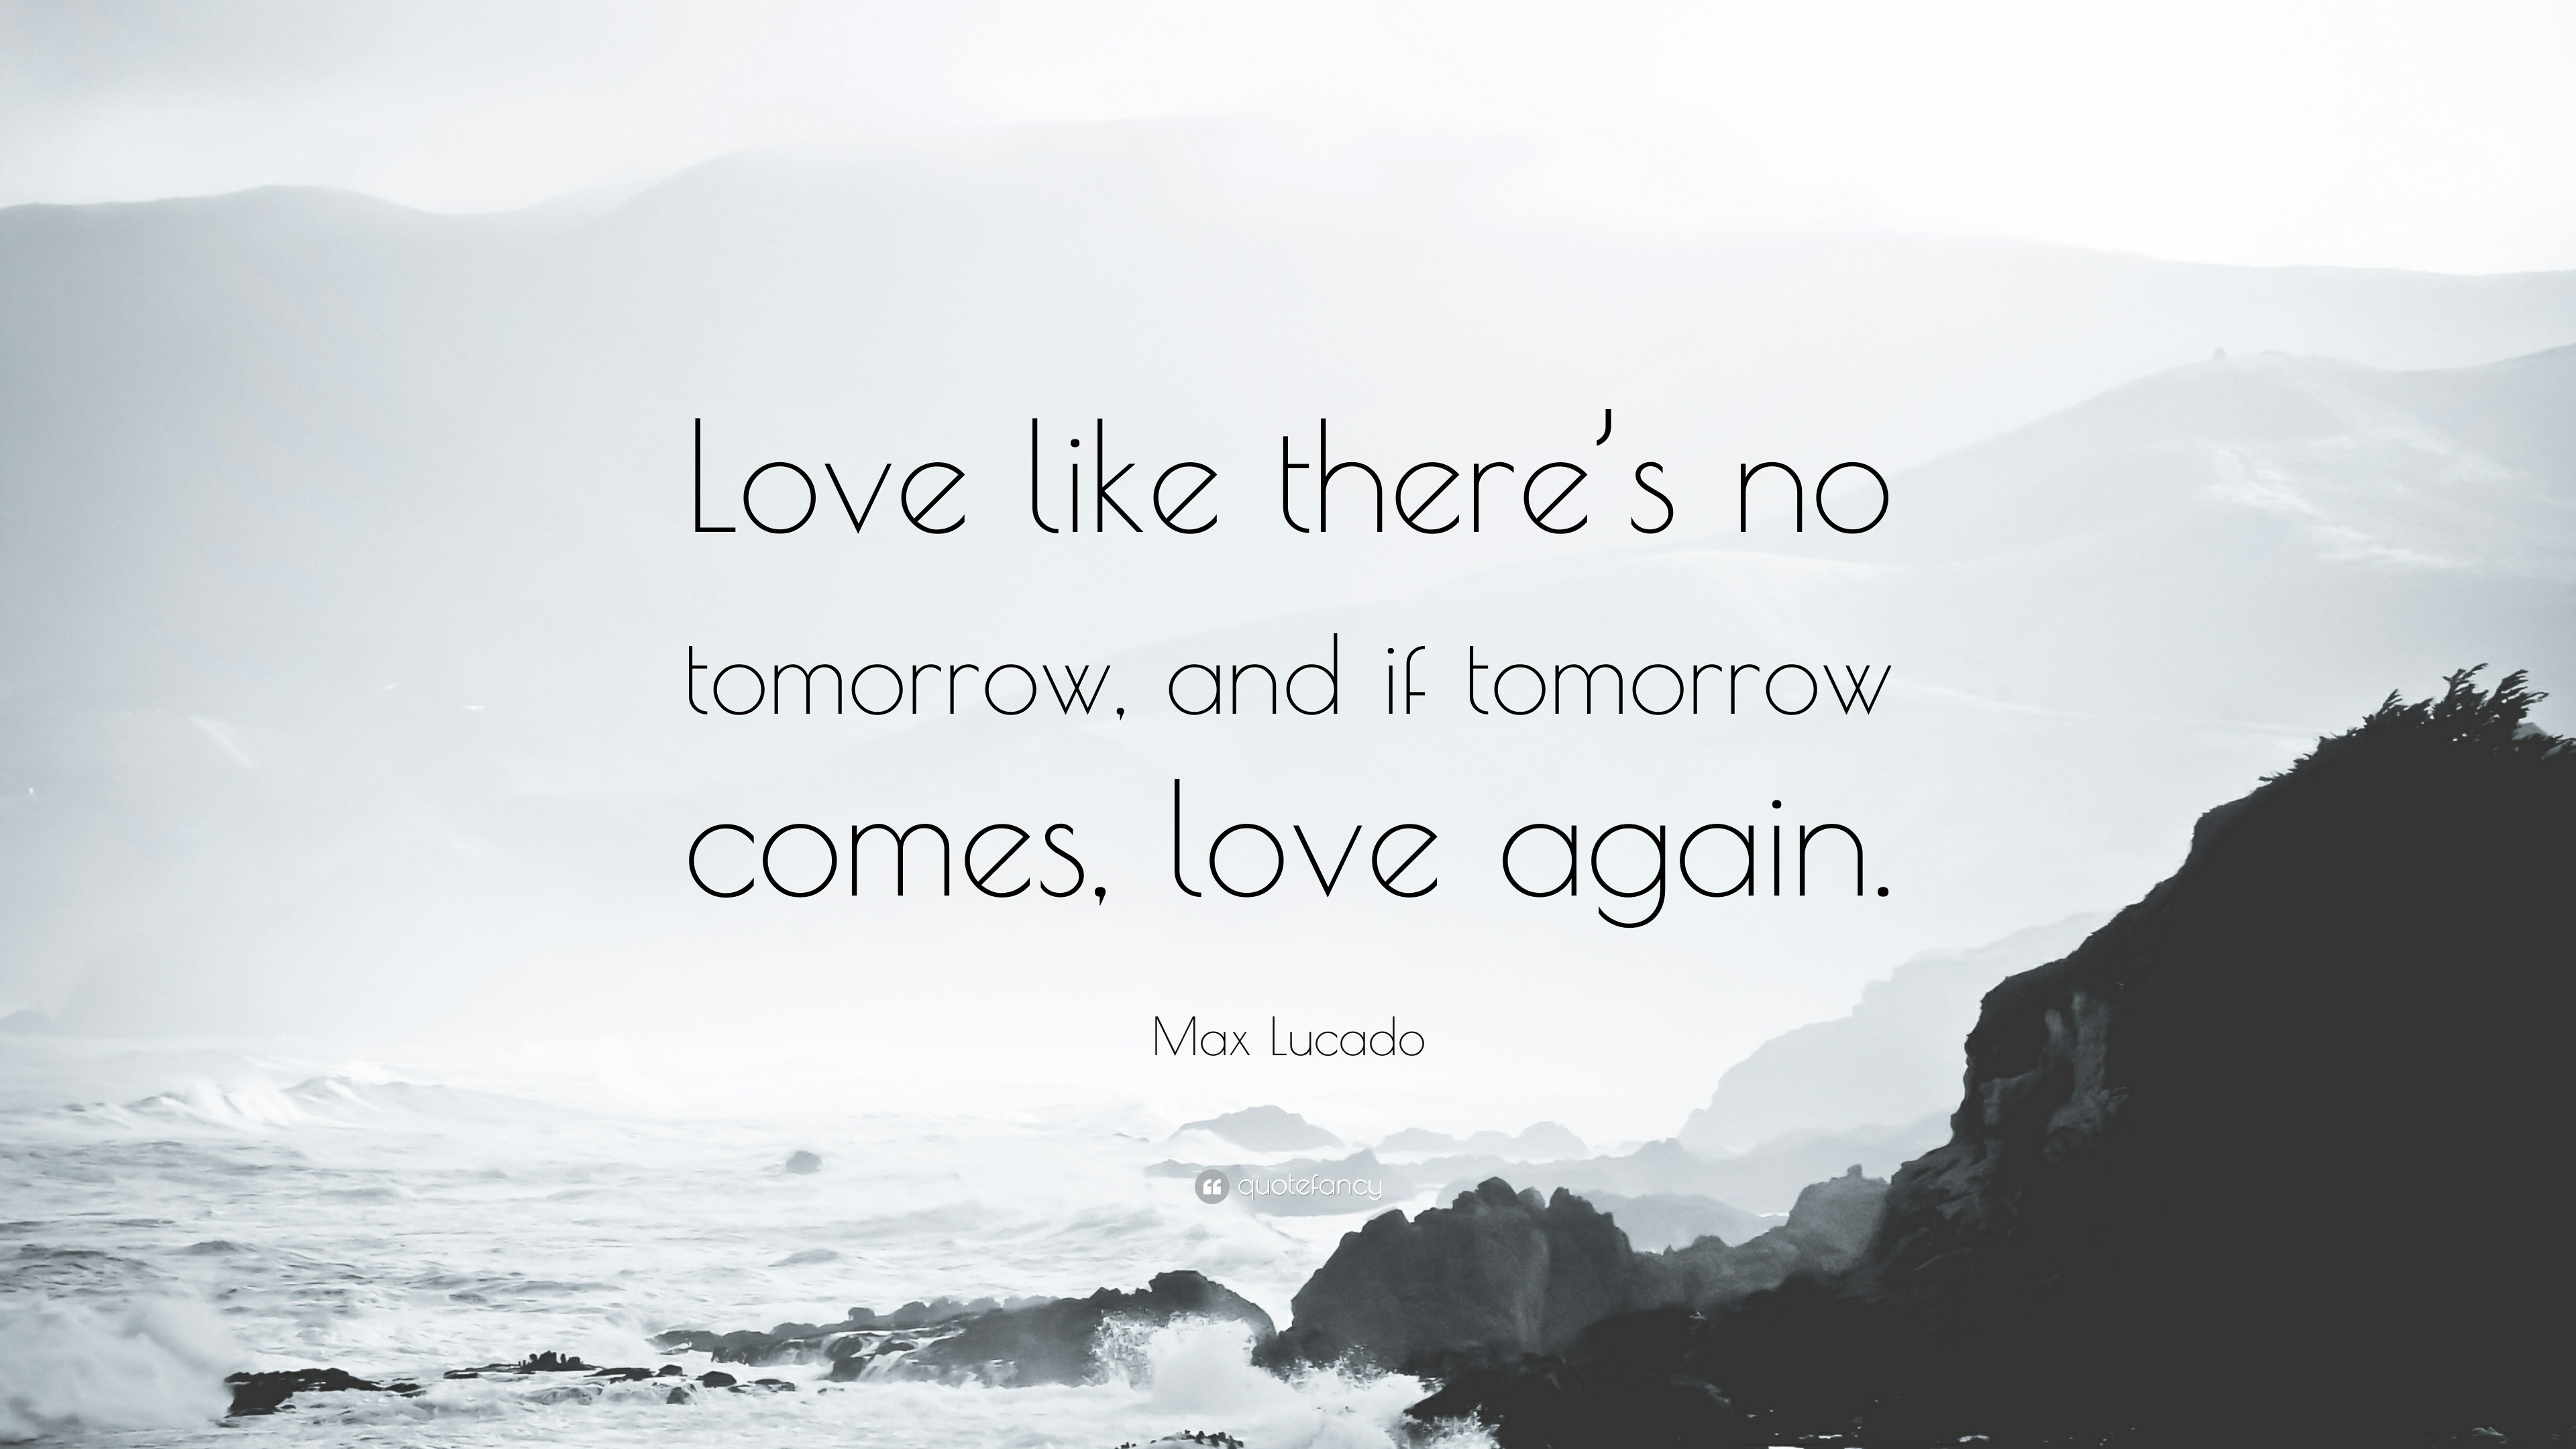 Max Lucado Quote “Love like there s no tomorrow and if tomorrow es